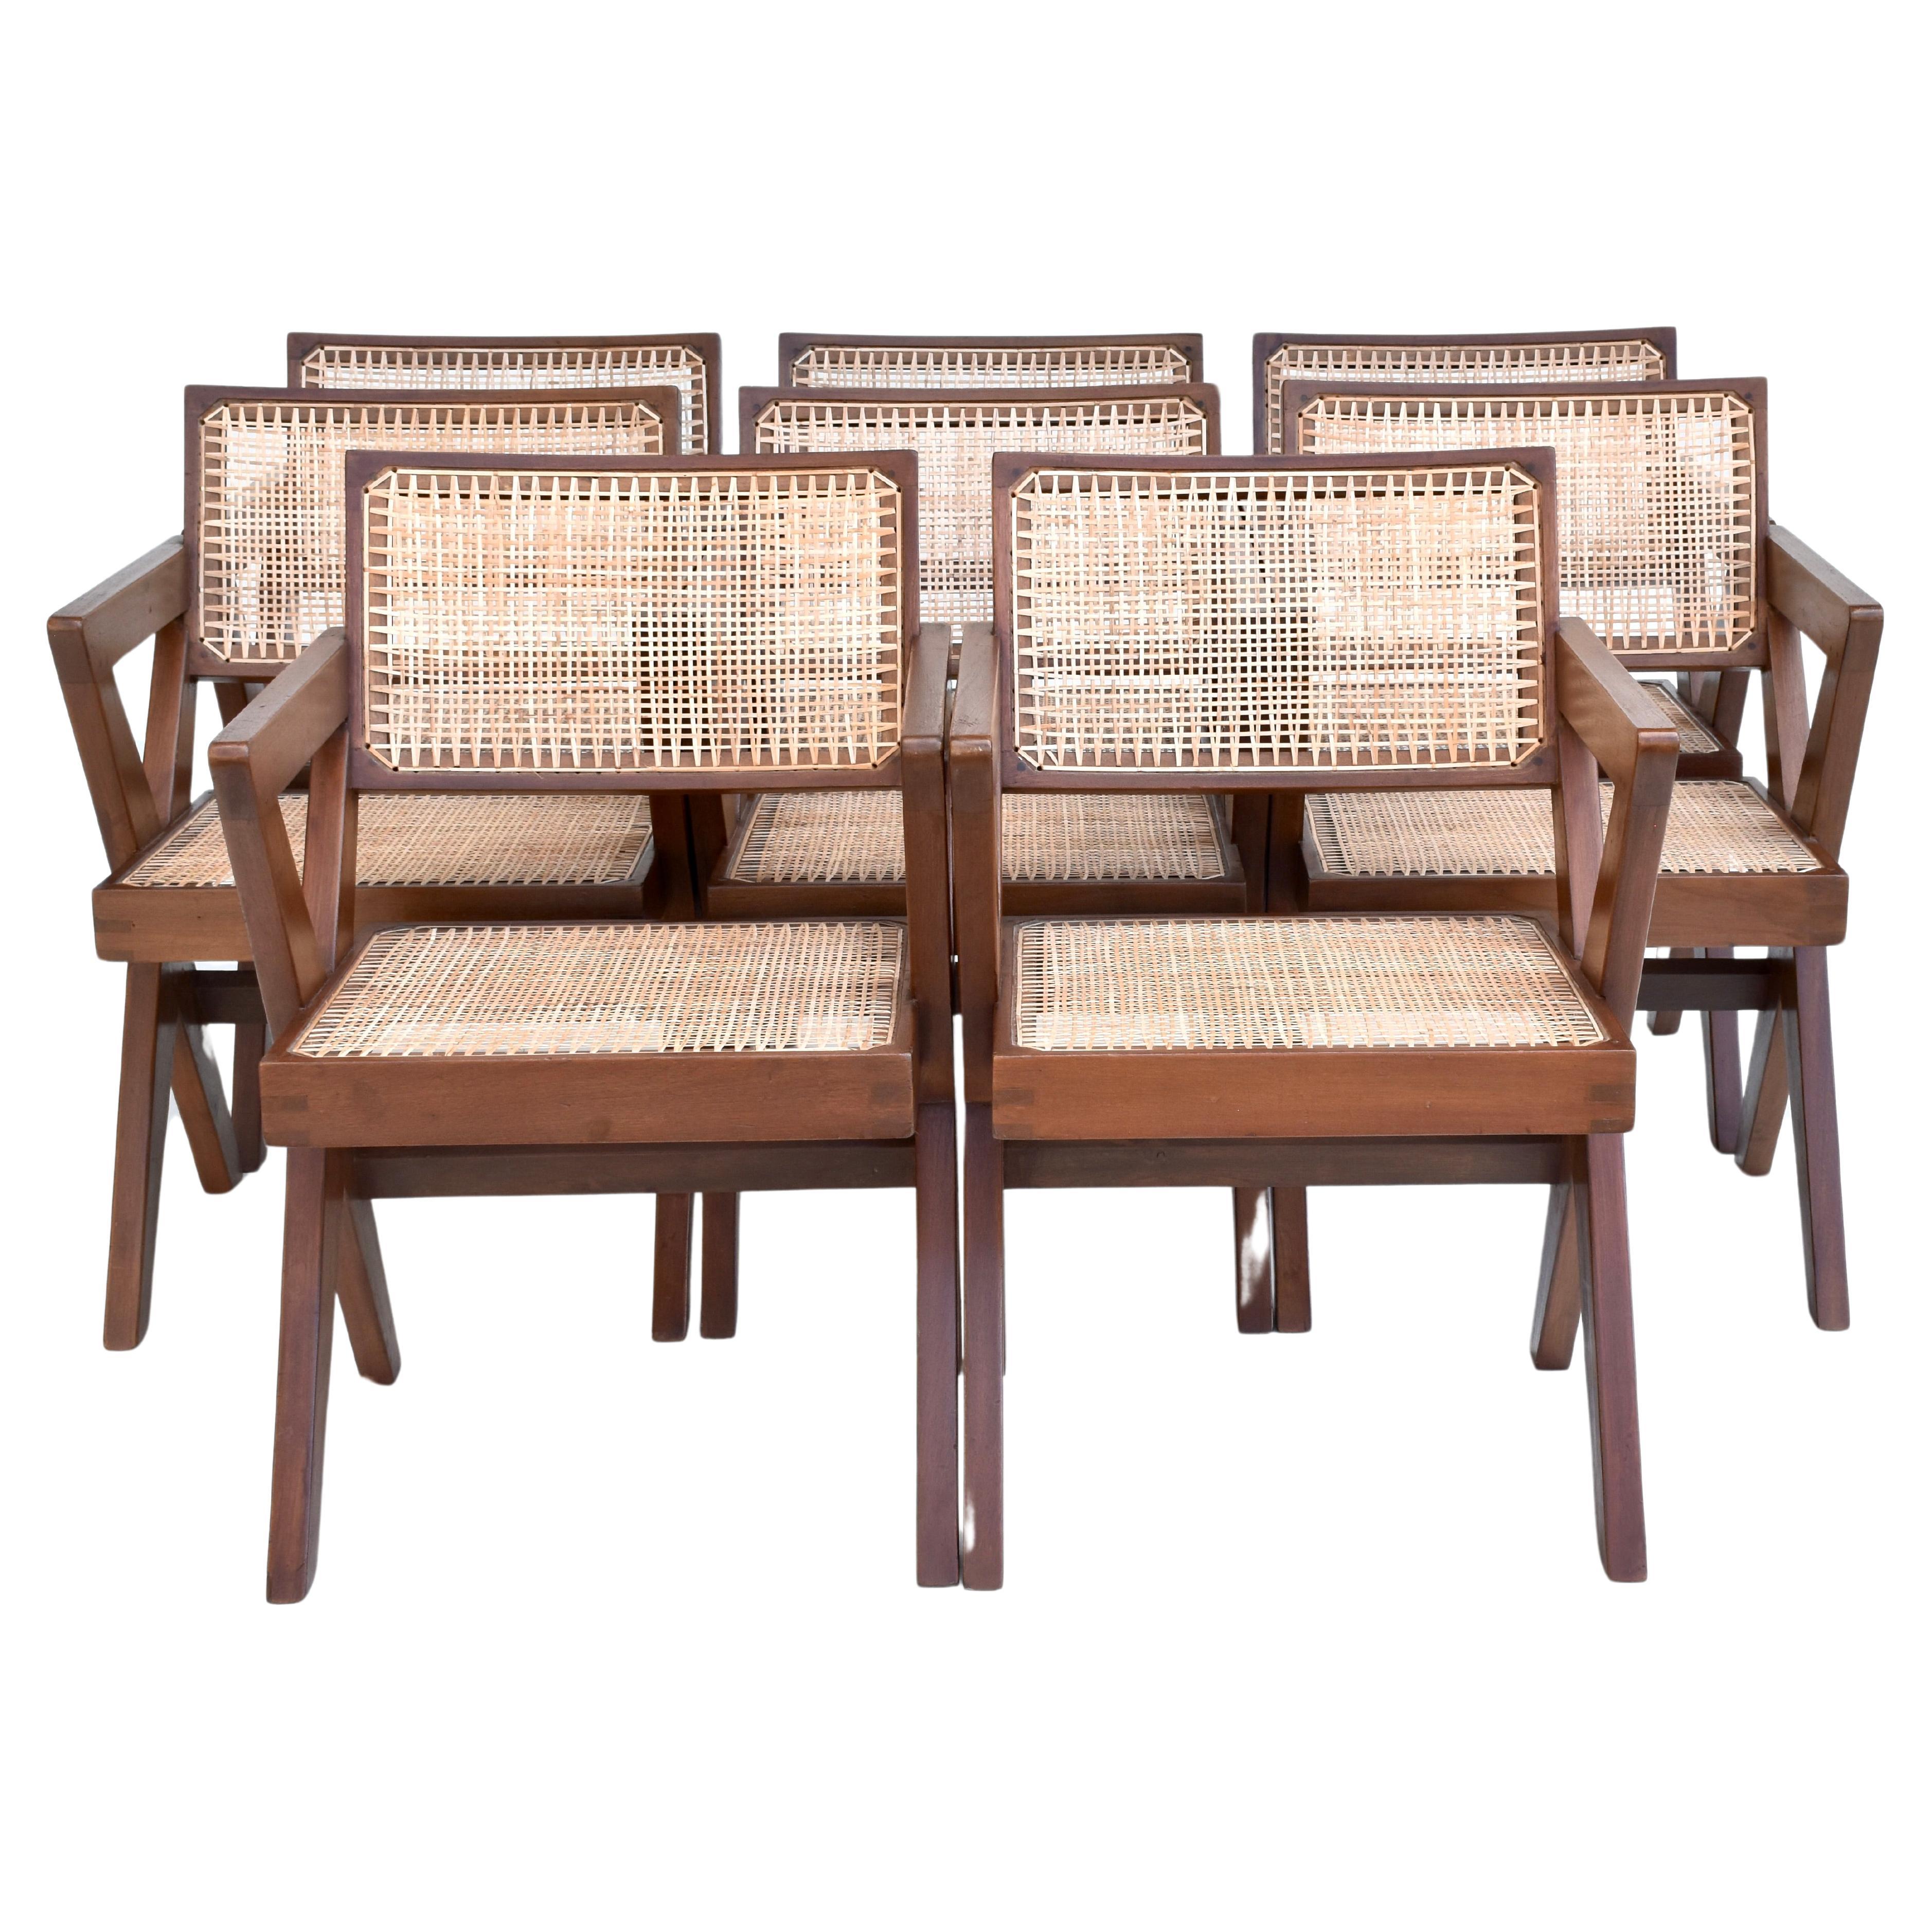 Mid-20th Century Pierre Jeanneret Set of 8 X-Leg Office Chairs Circa 1960s, Chandigarh For Sale